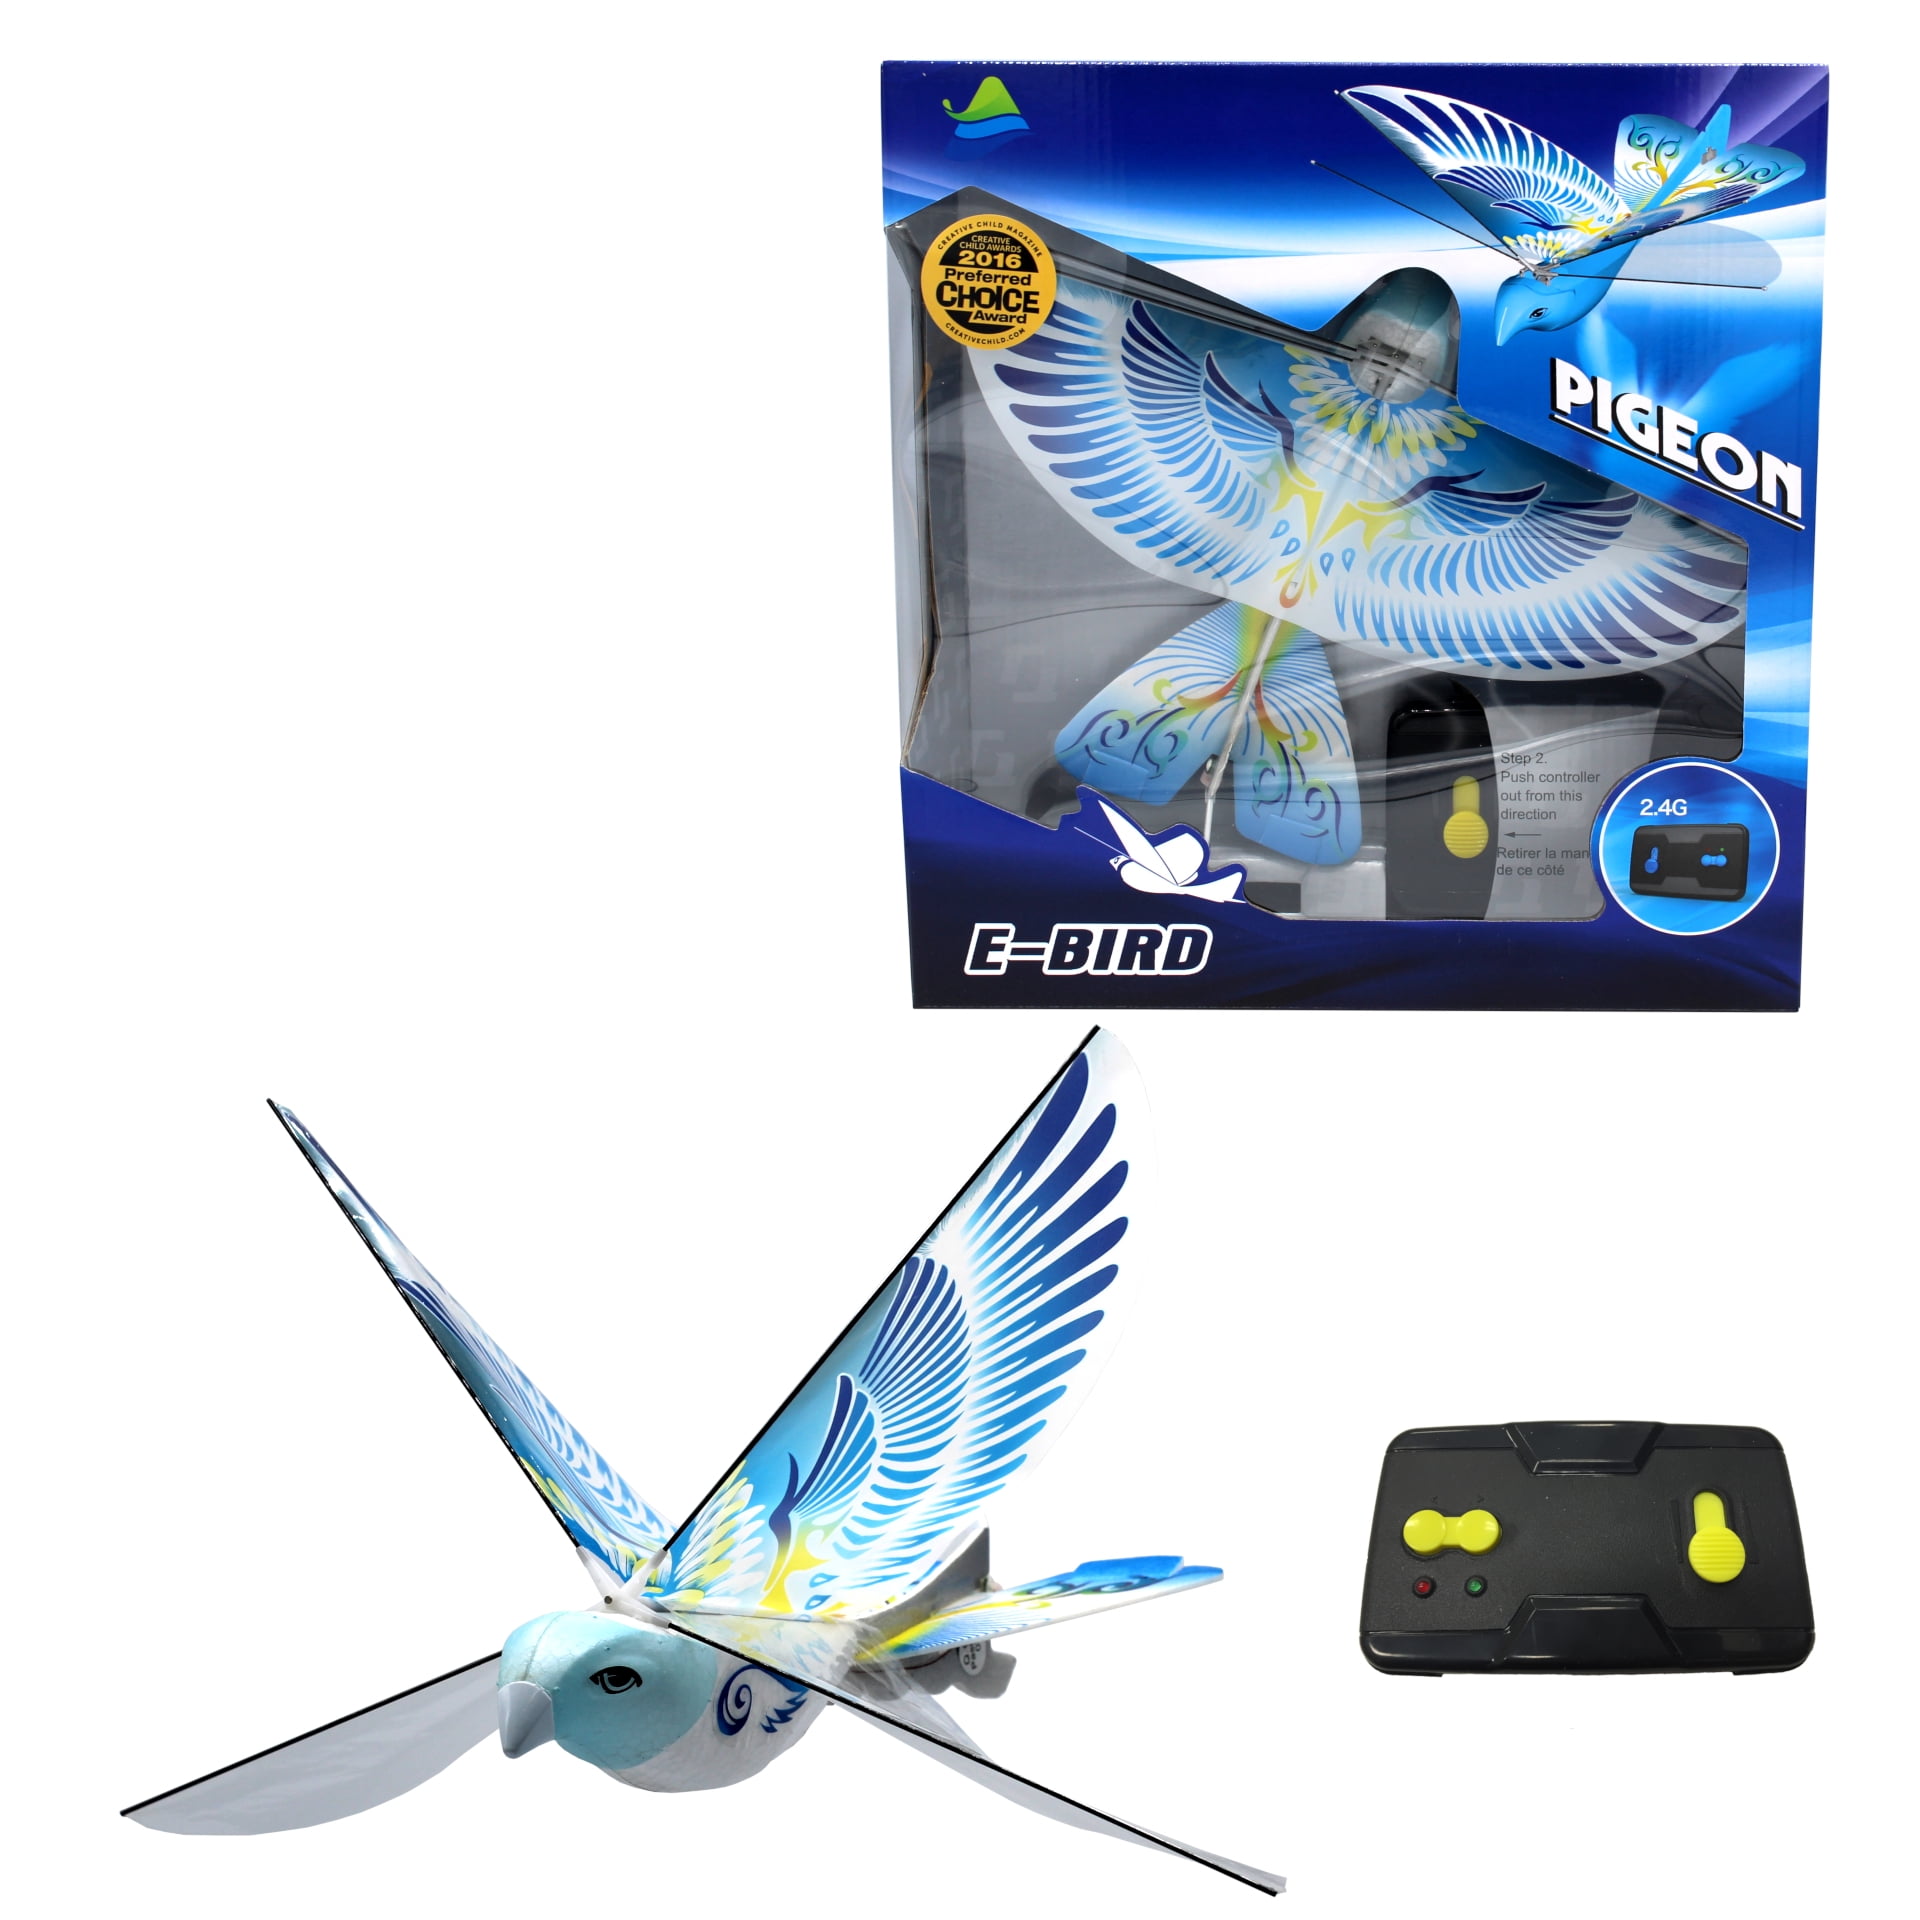 New Sealed Parrot Rolling Spider Minidrone blue 